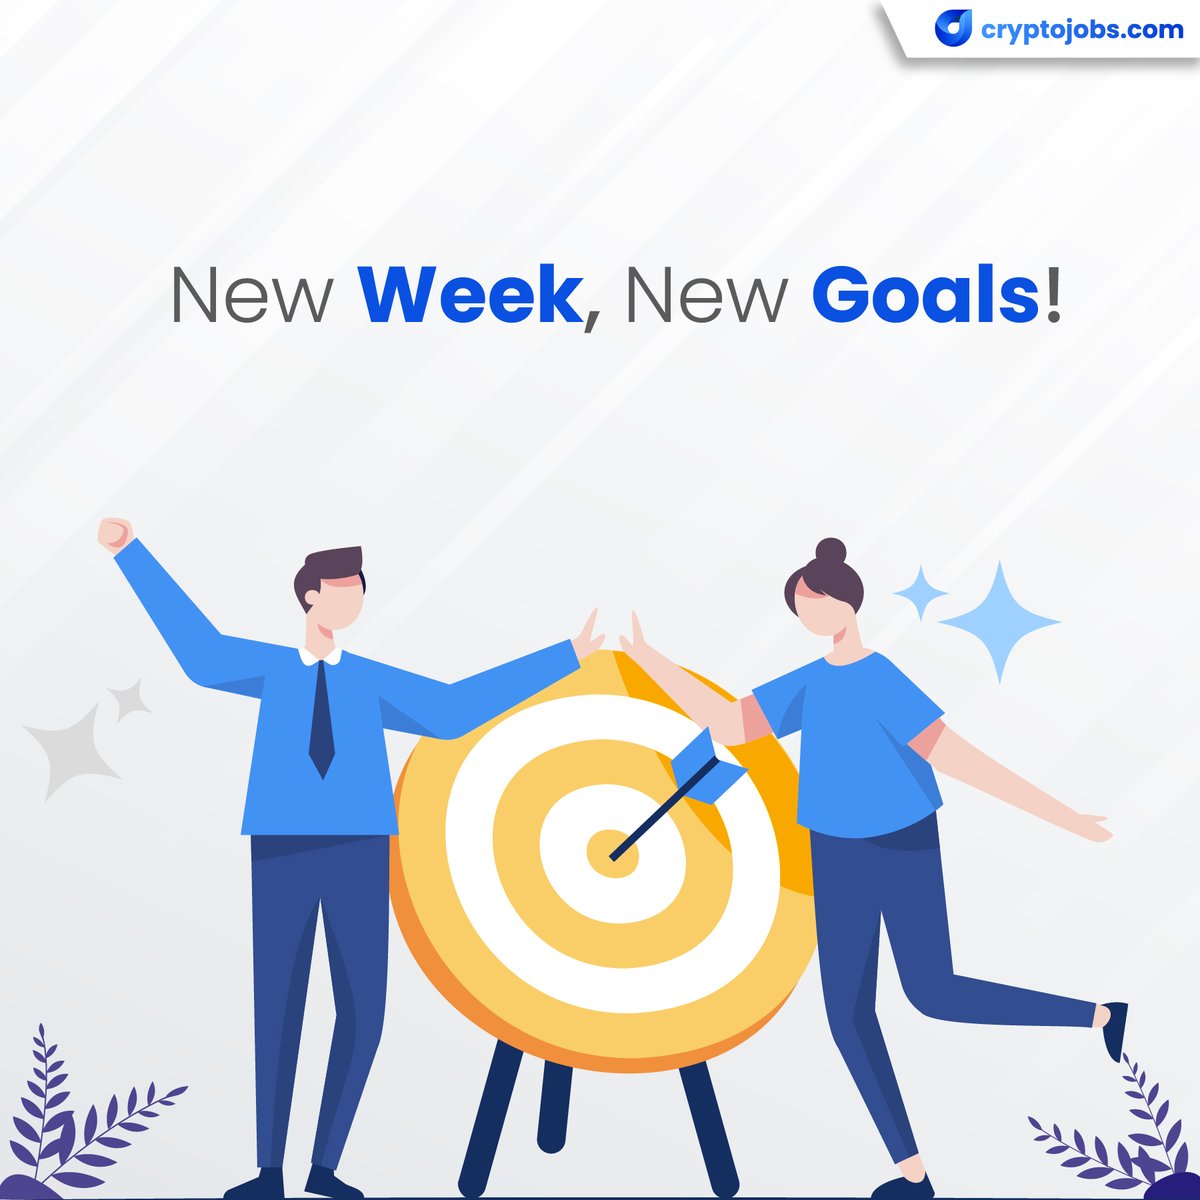 Here's to a fresh start! 🎯Set your sights on success and let's crush those weekly goals together! Don't forget to check the latest web3 jobs here: cryptojobs.com/jobs